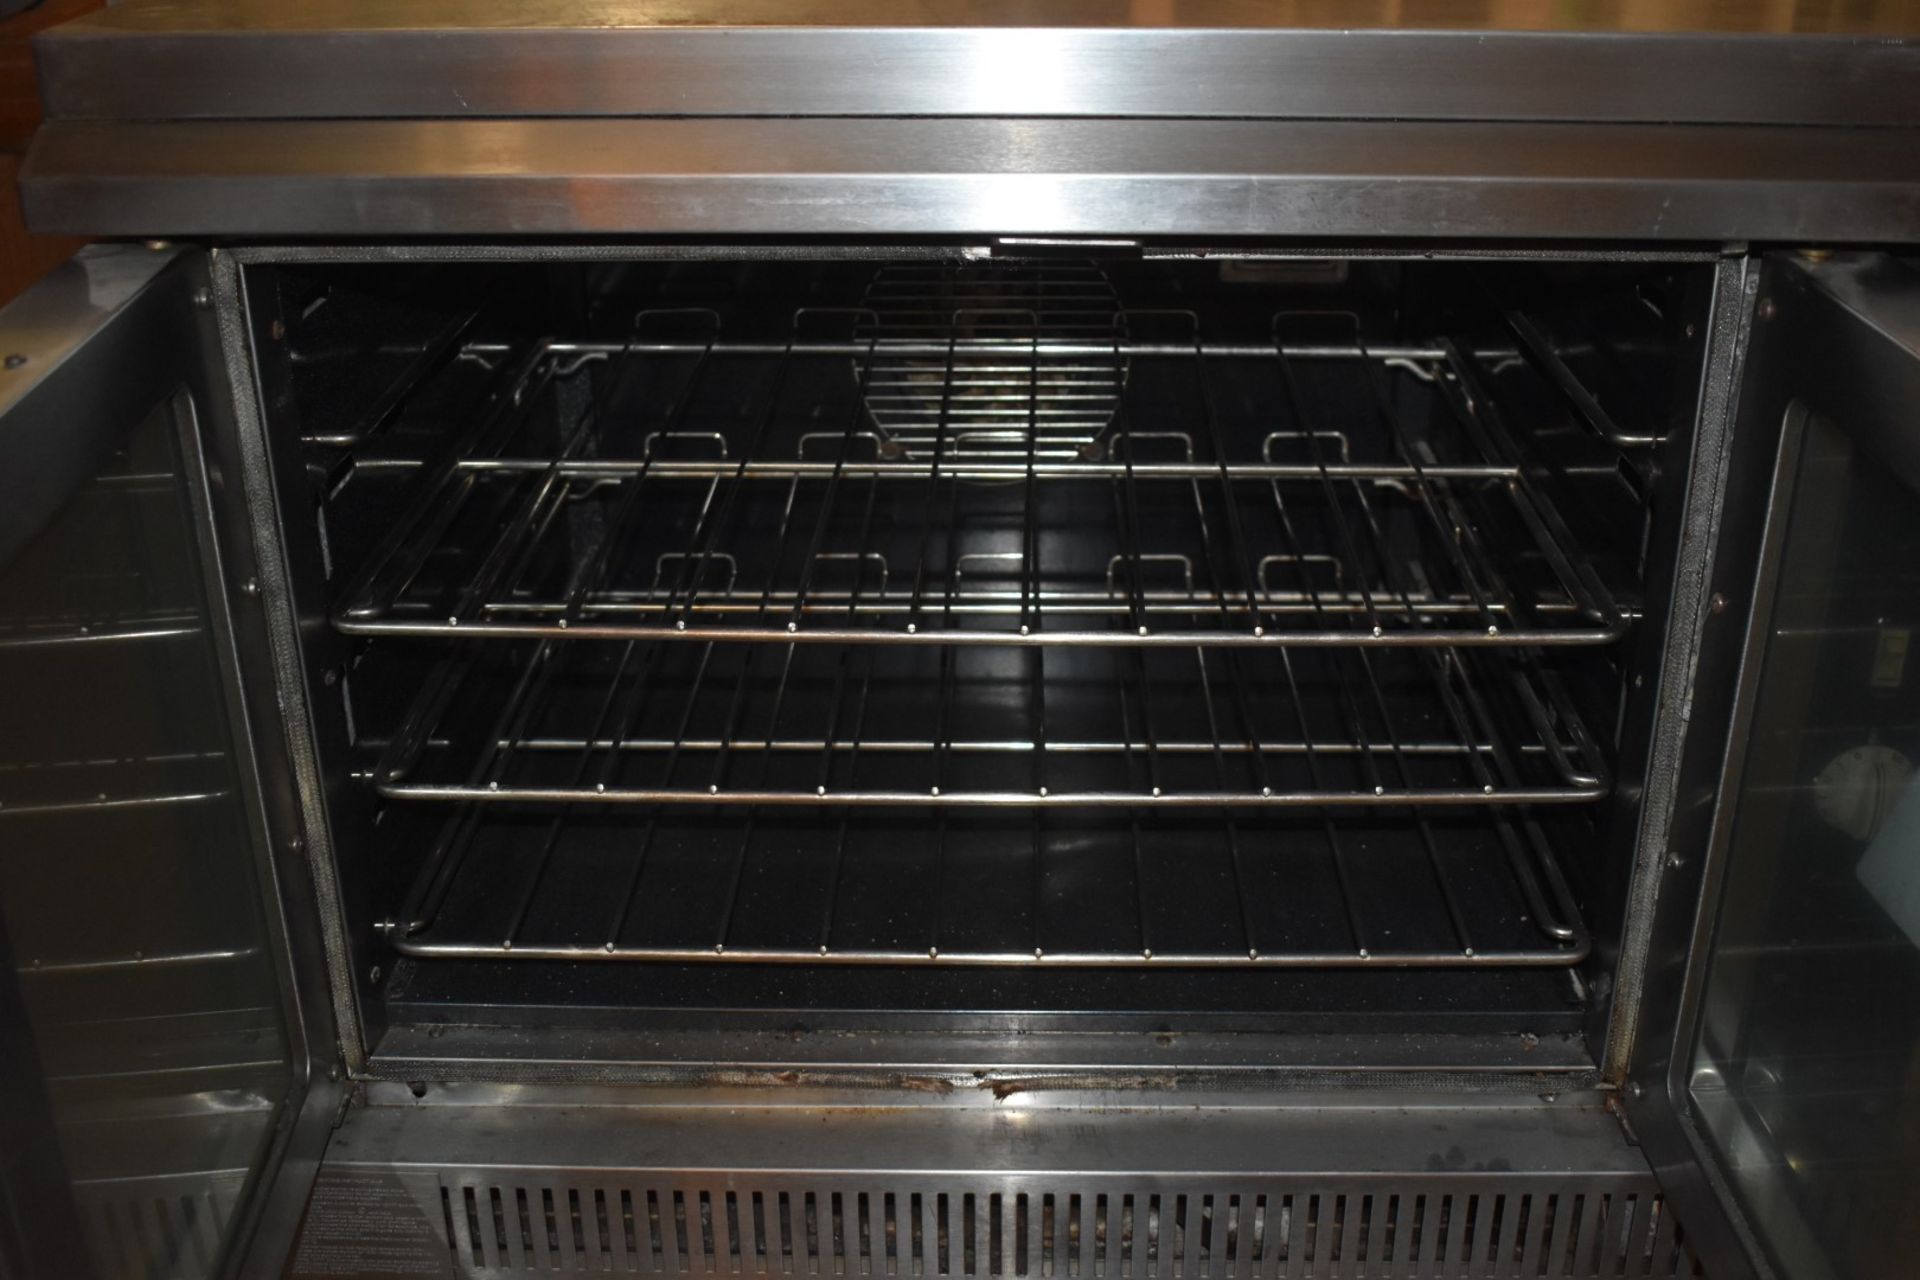 1 x Falcon G1112 Convection Oven - Dimensions: H75 x W90 x D78 cms - 230v / Natural Gas - Image 10 of 10